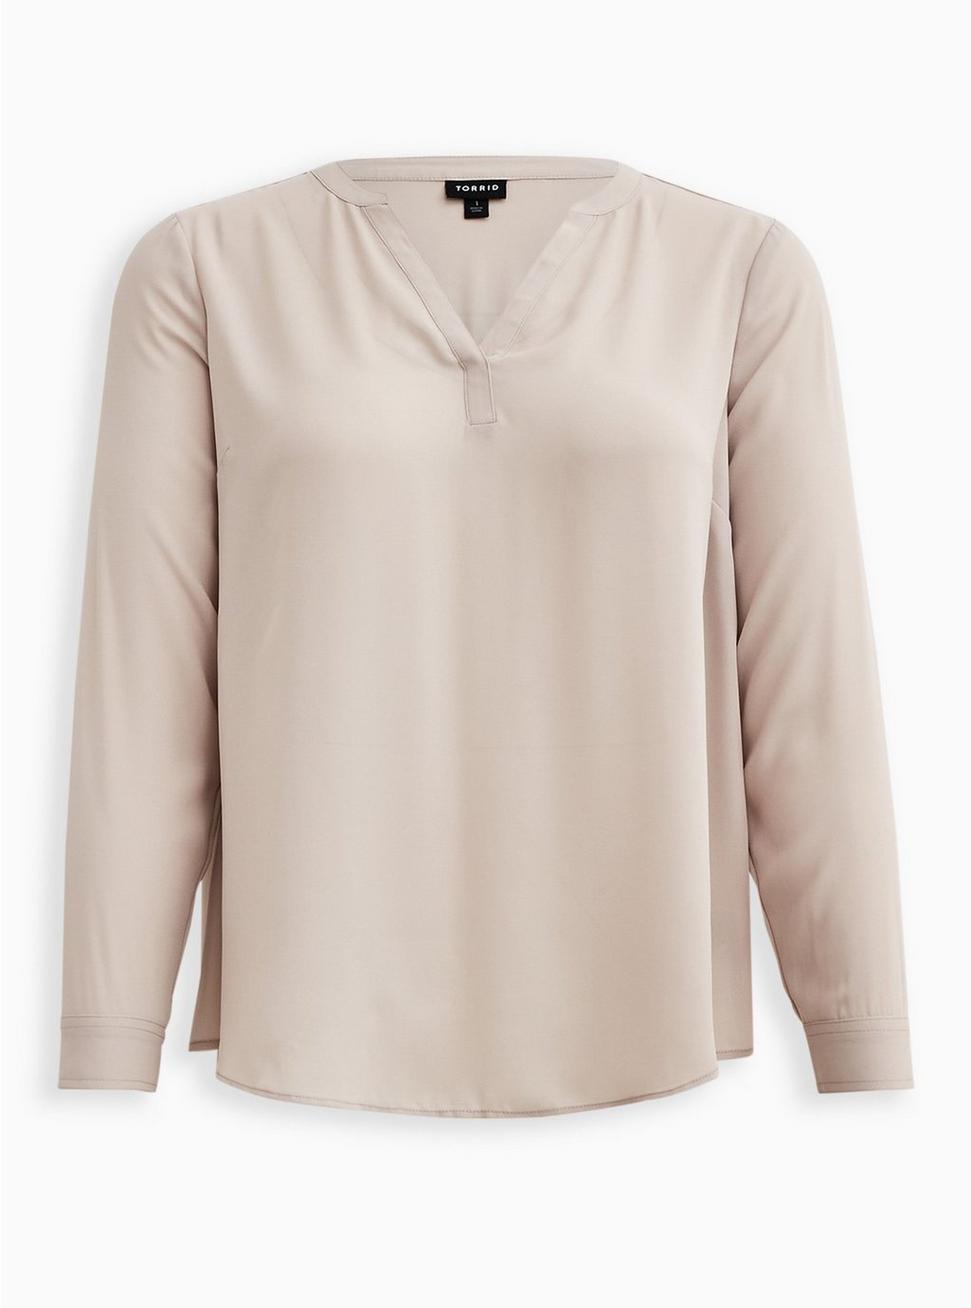 Plus Size Georgette Hi-Low Pullover Long Sleeve Blouse, CHATEAU GRAY, hi-res